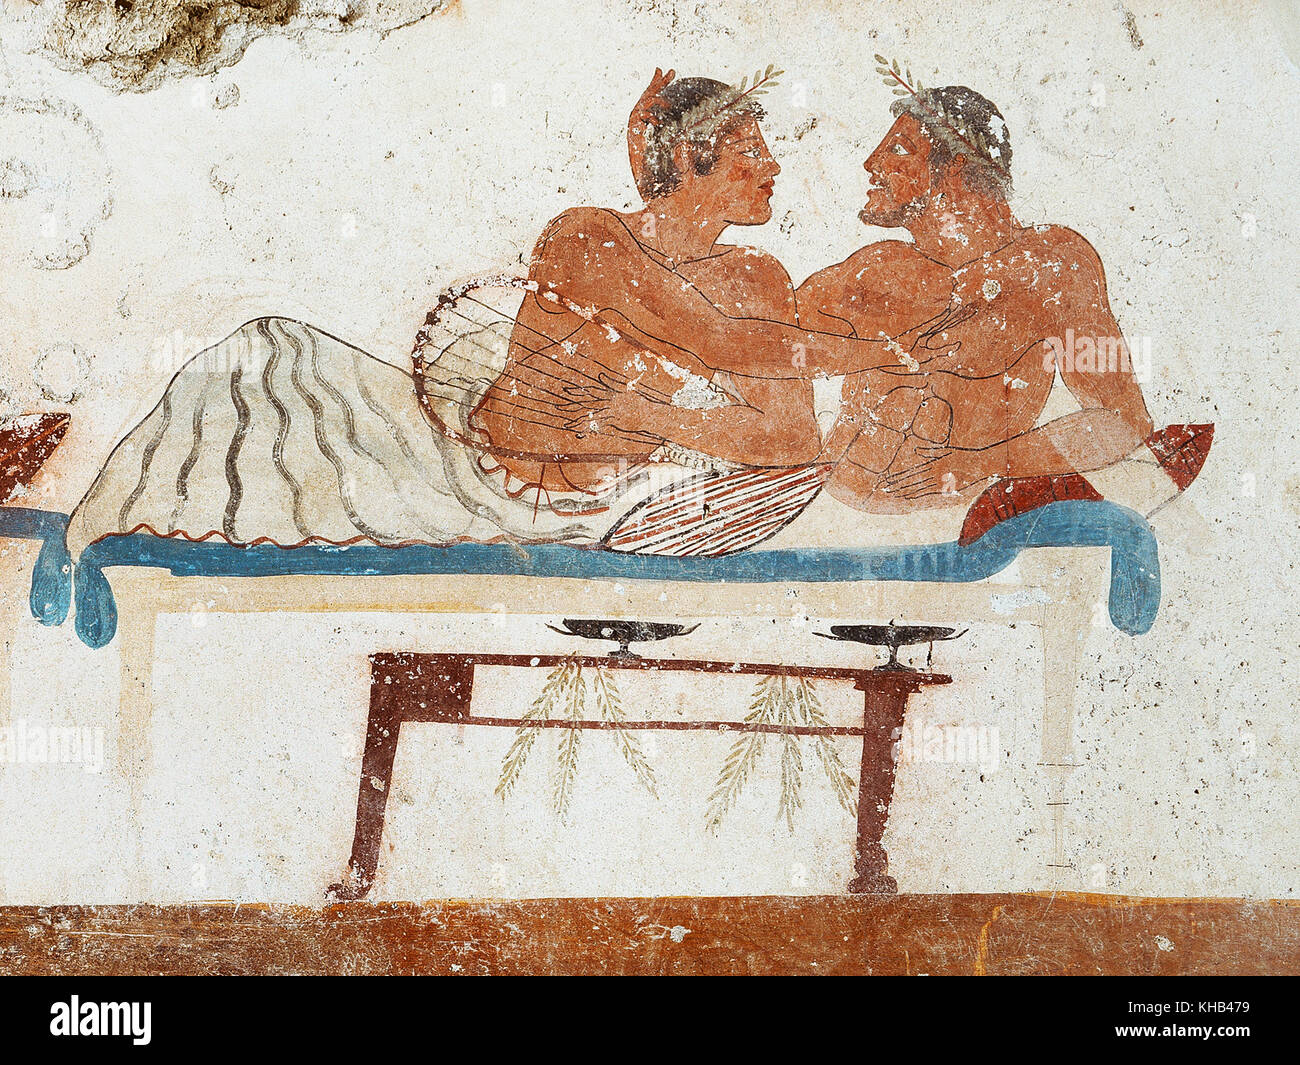 Symposium on the north wall. Paestum. Magna Graecia. Southern Italy. Ancient Greek. 5th century BC. National Museum of Paestum. Stock Photo